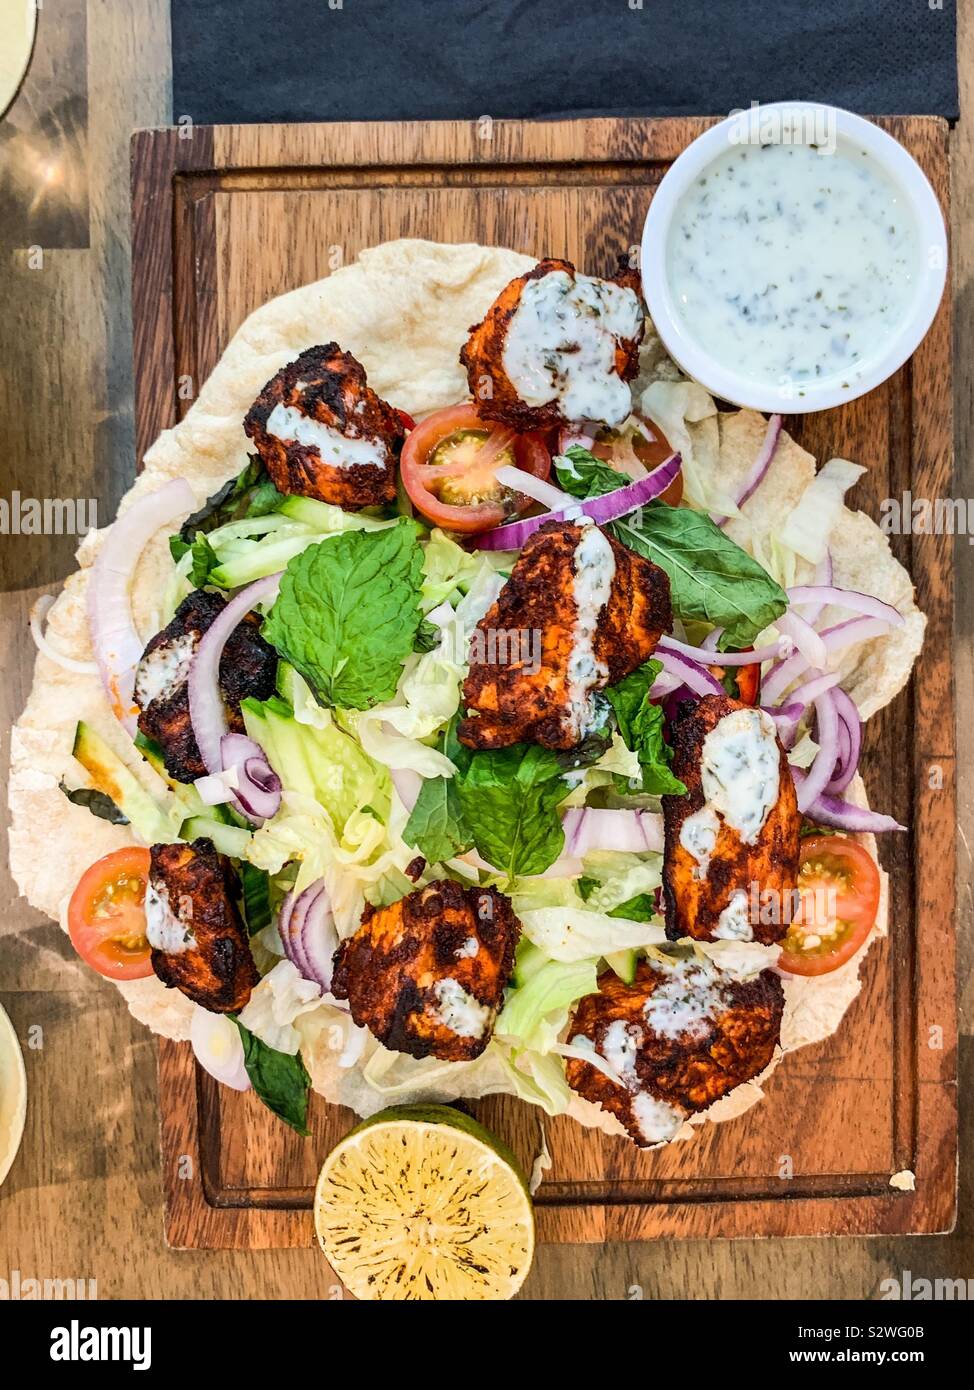 Chicken tikka in a flat bread and salad Stock Photo